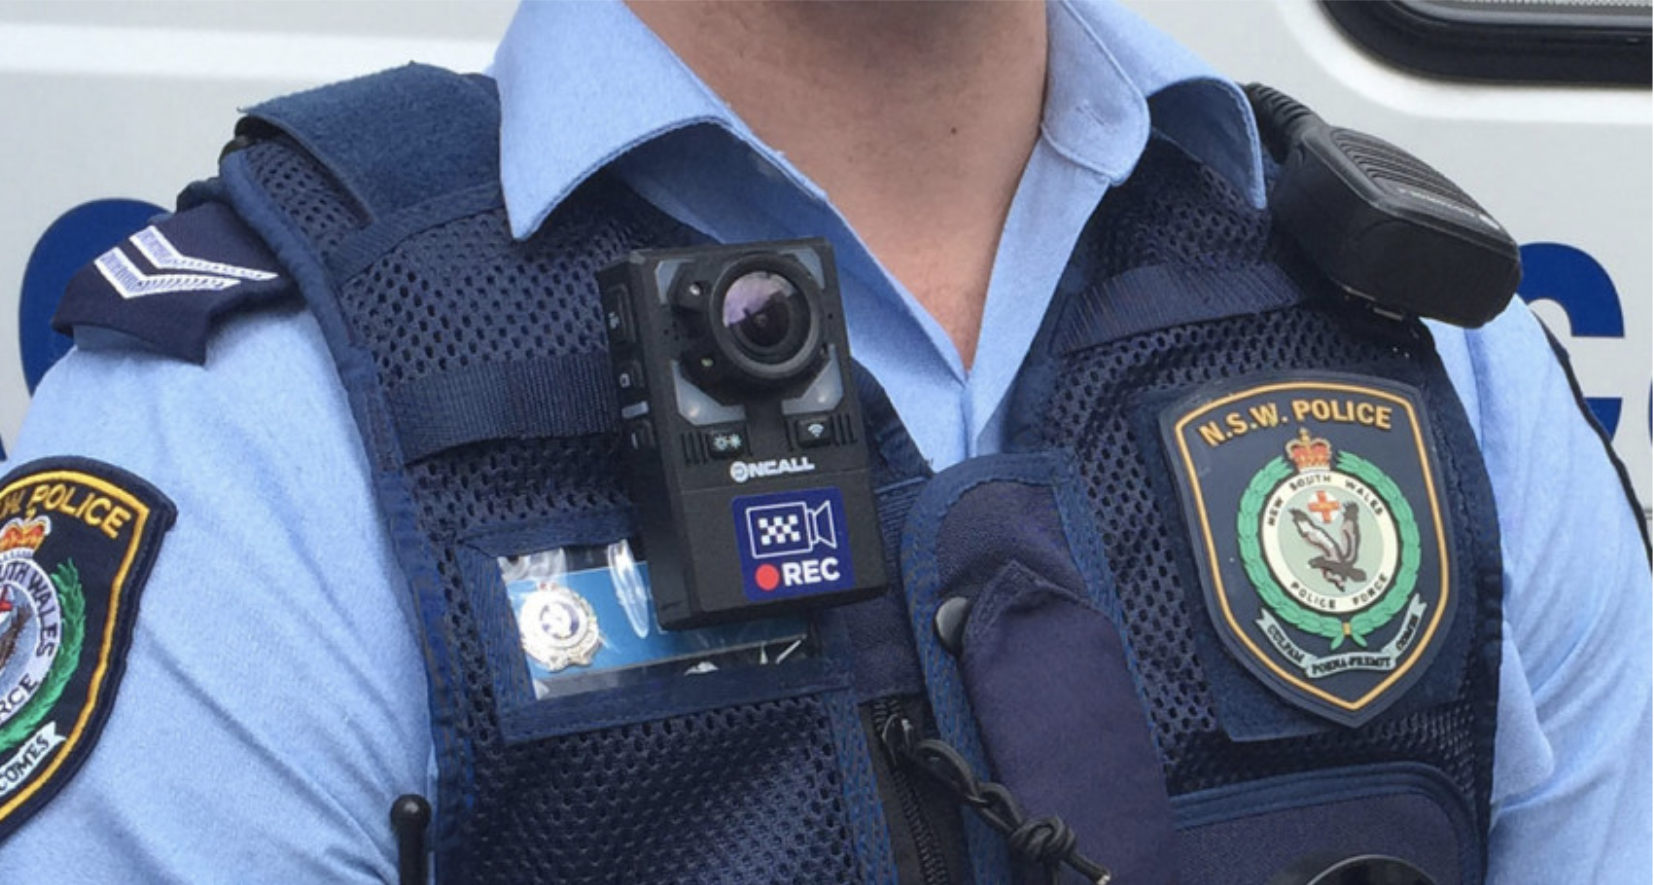 Body worn police camera on NSW police officer